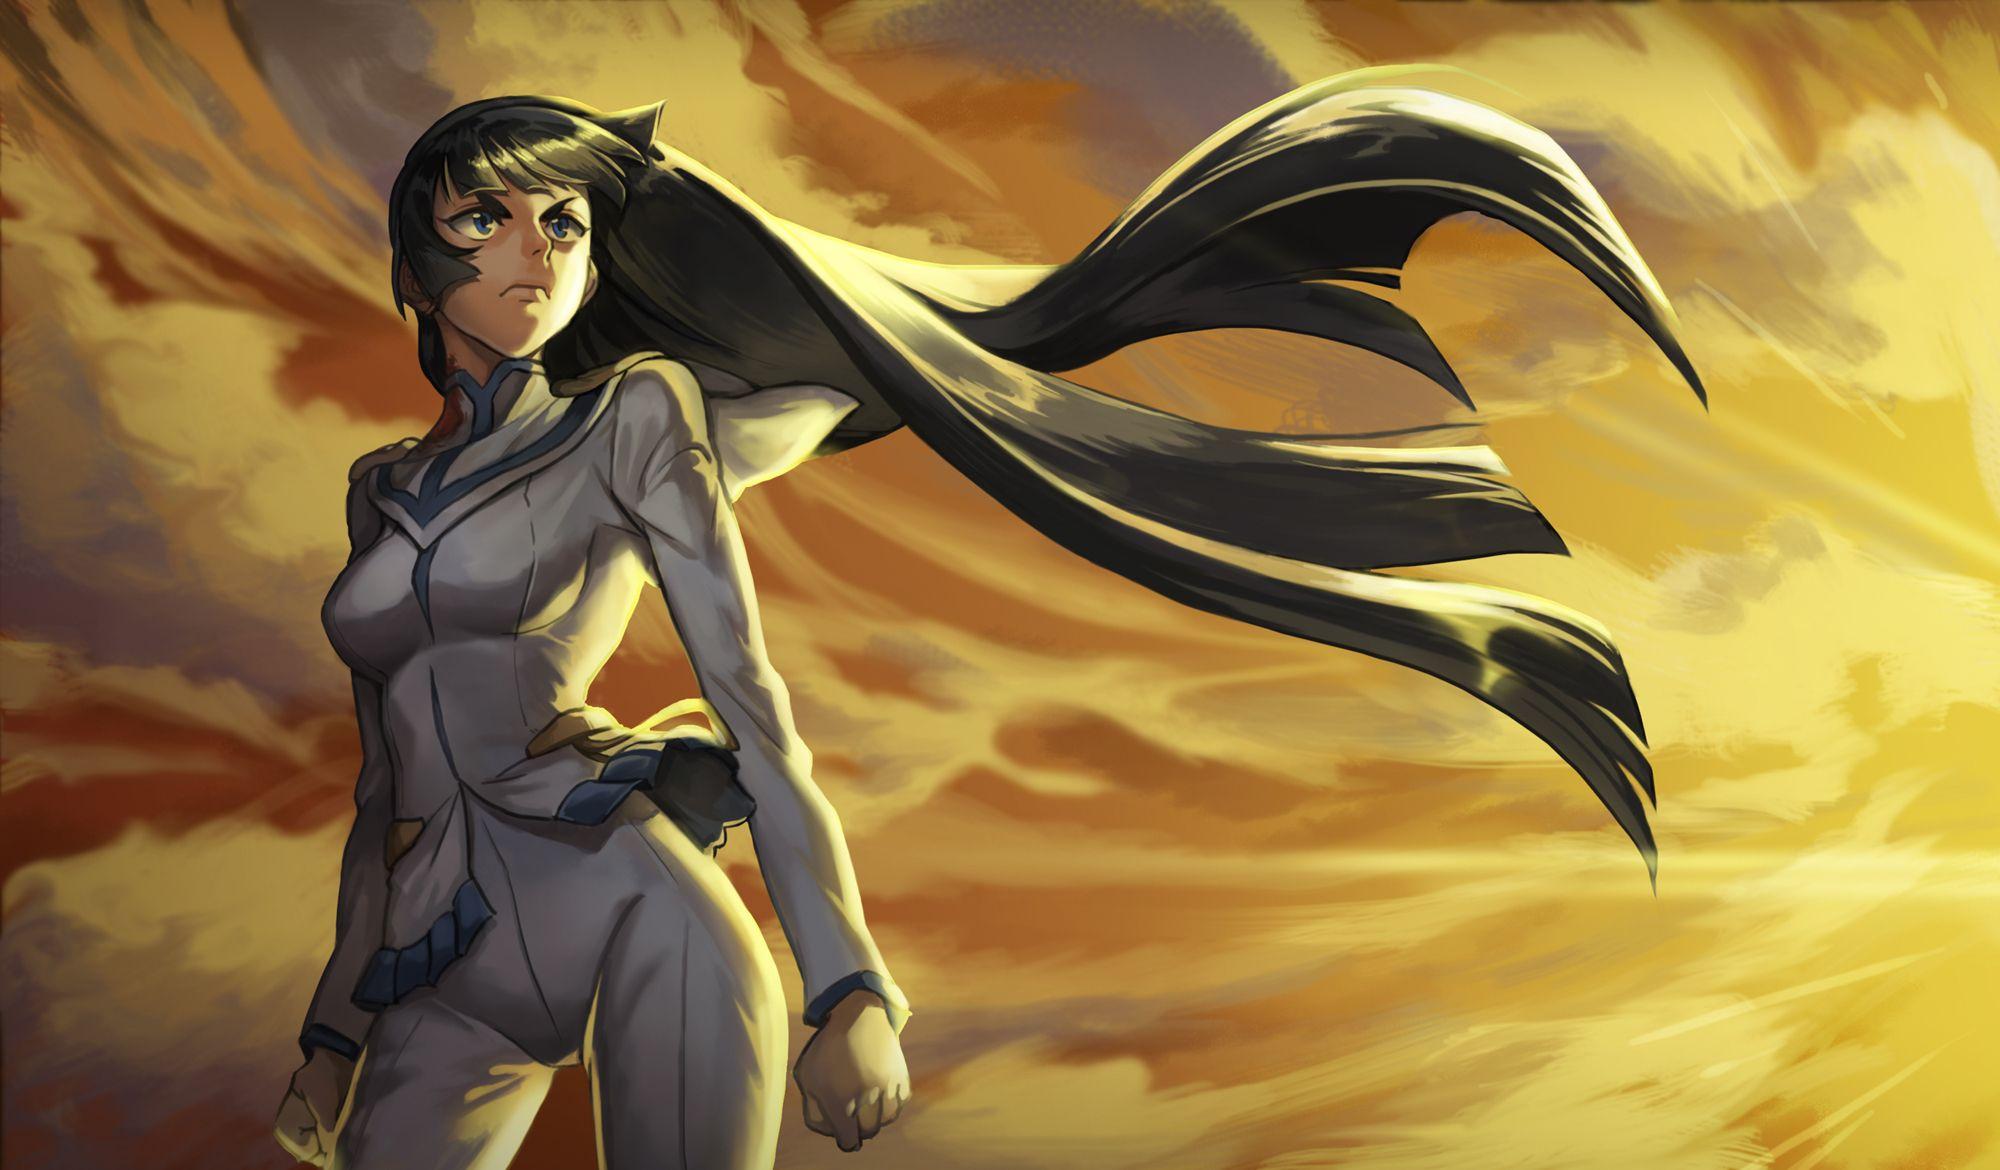 Wallpaper ID 1528711  Kiryuin Satsuki females wall  building feature  720P real people Kill la Kill day young women nature indoors  creativity art and craft clothing free download